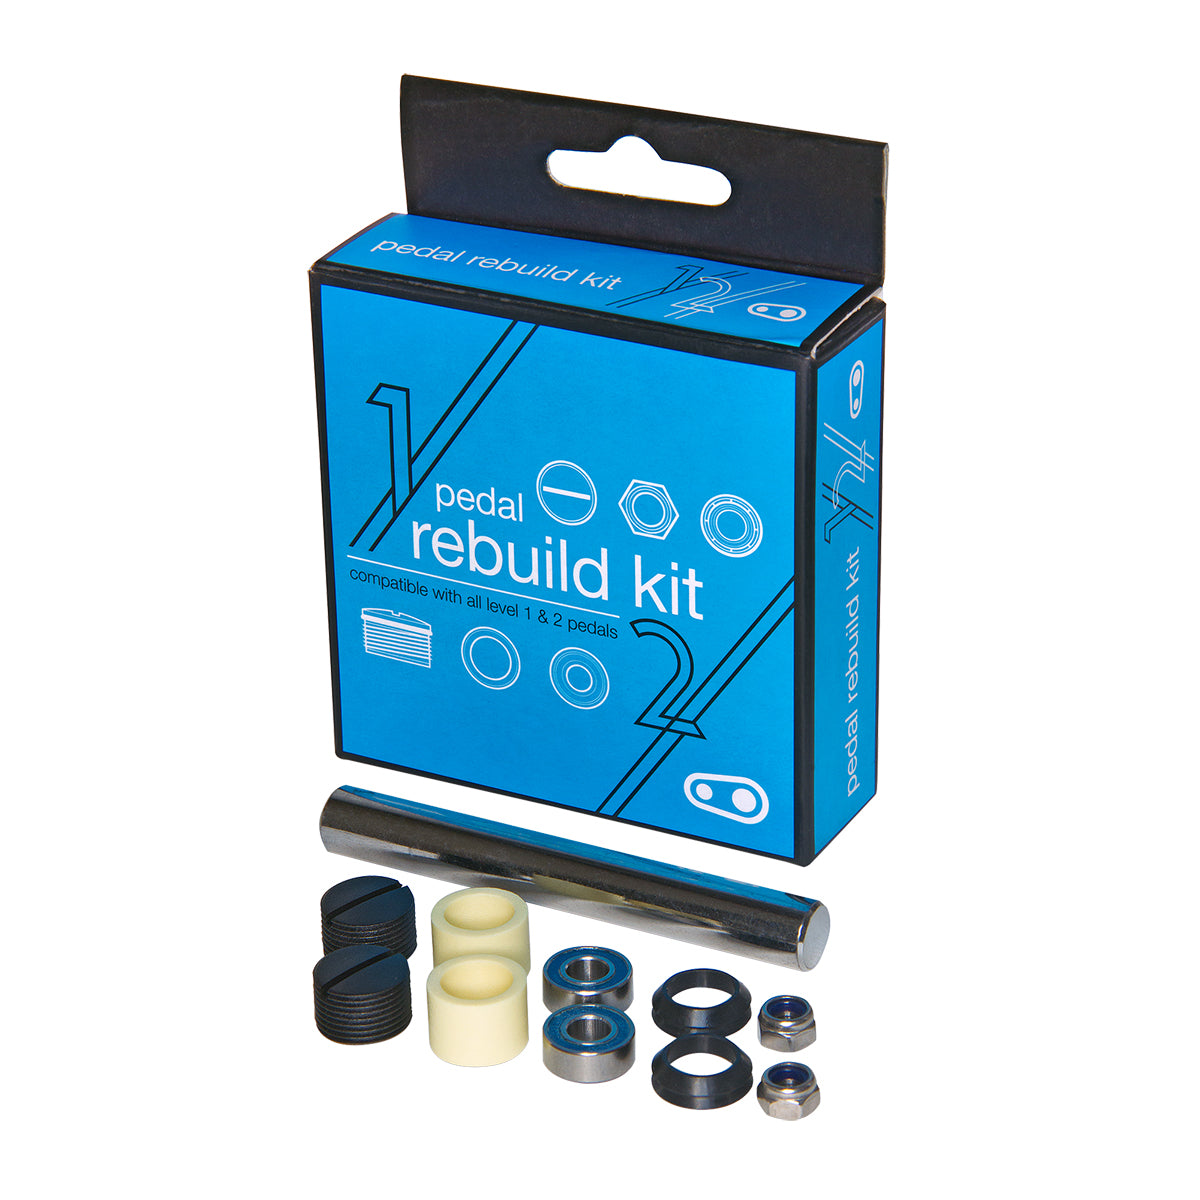 Crank brothers level 1 and 2 pedal kit includes:

2 end caps
2 spindle nuts
2 sealed ball bearings
2 bushings
2 double lip seals